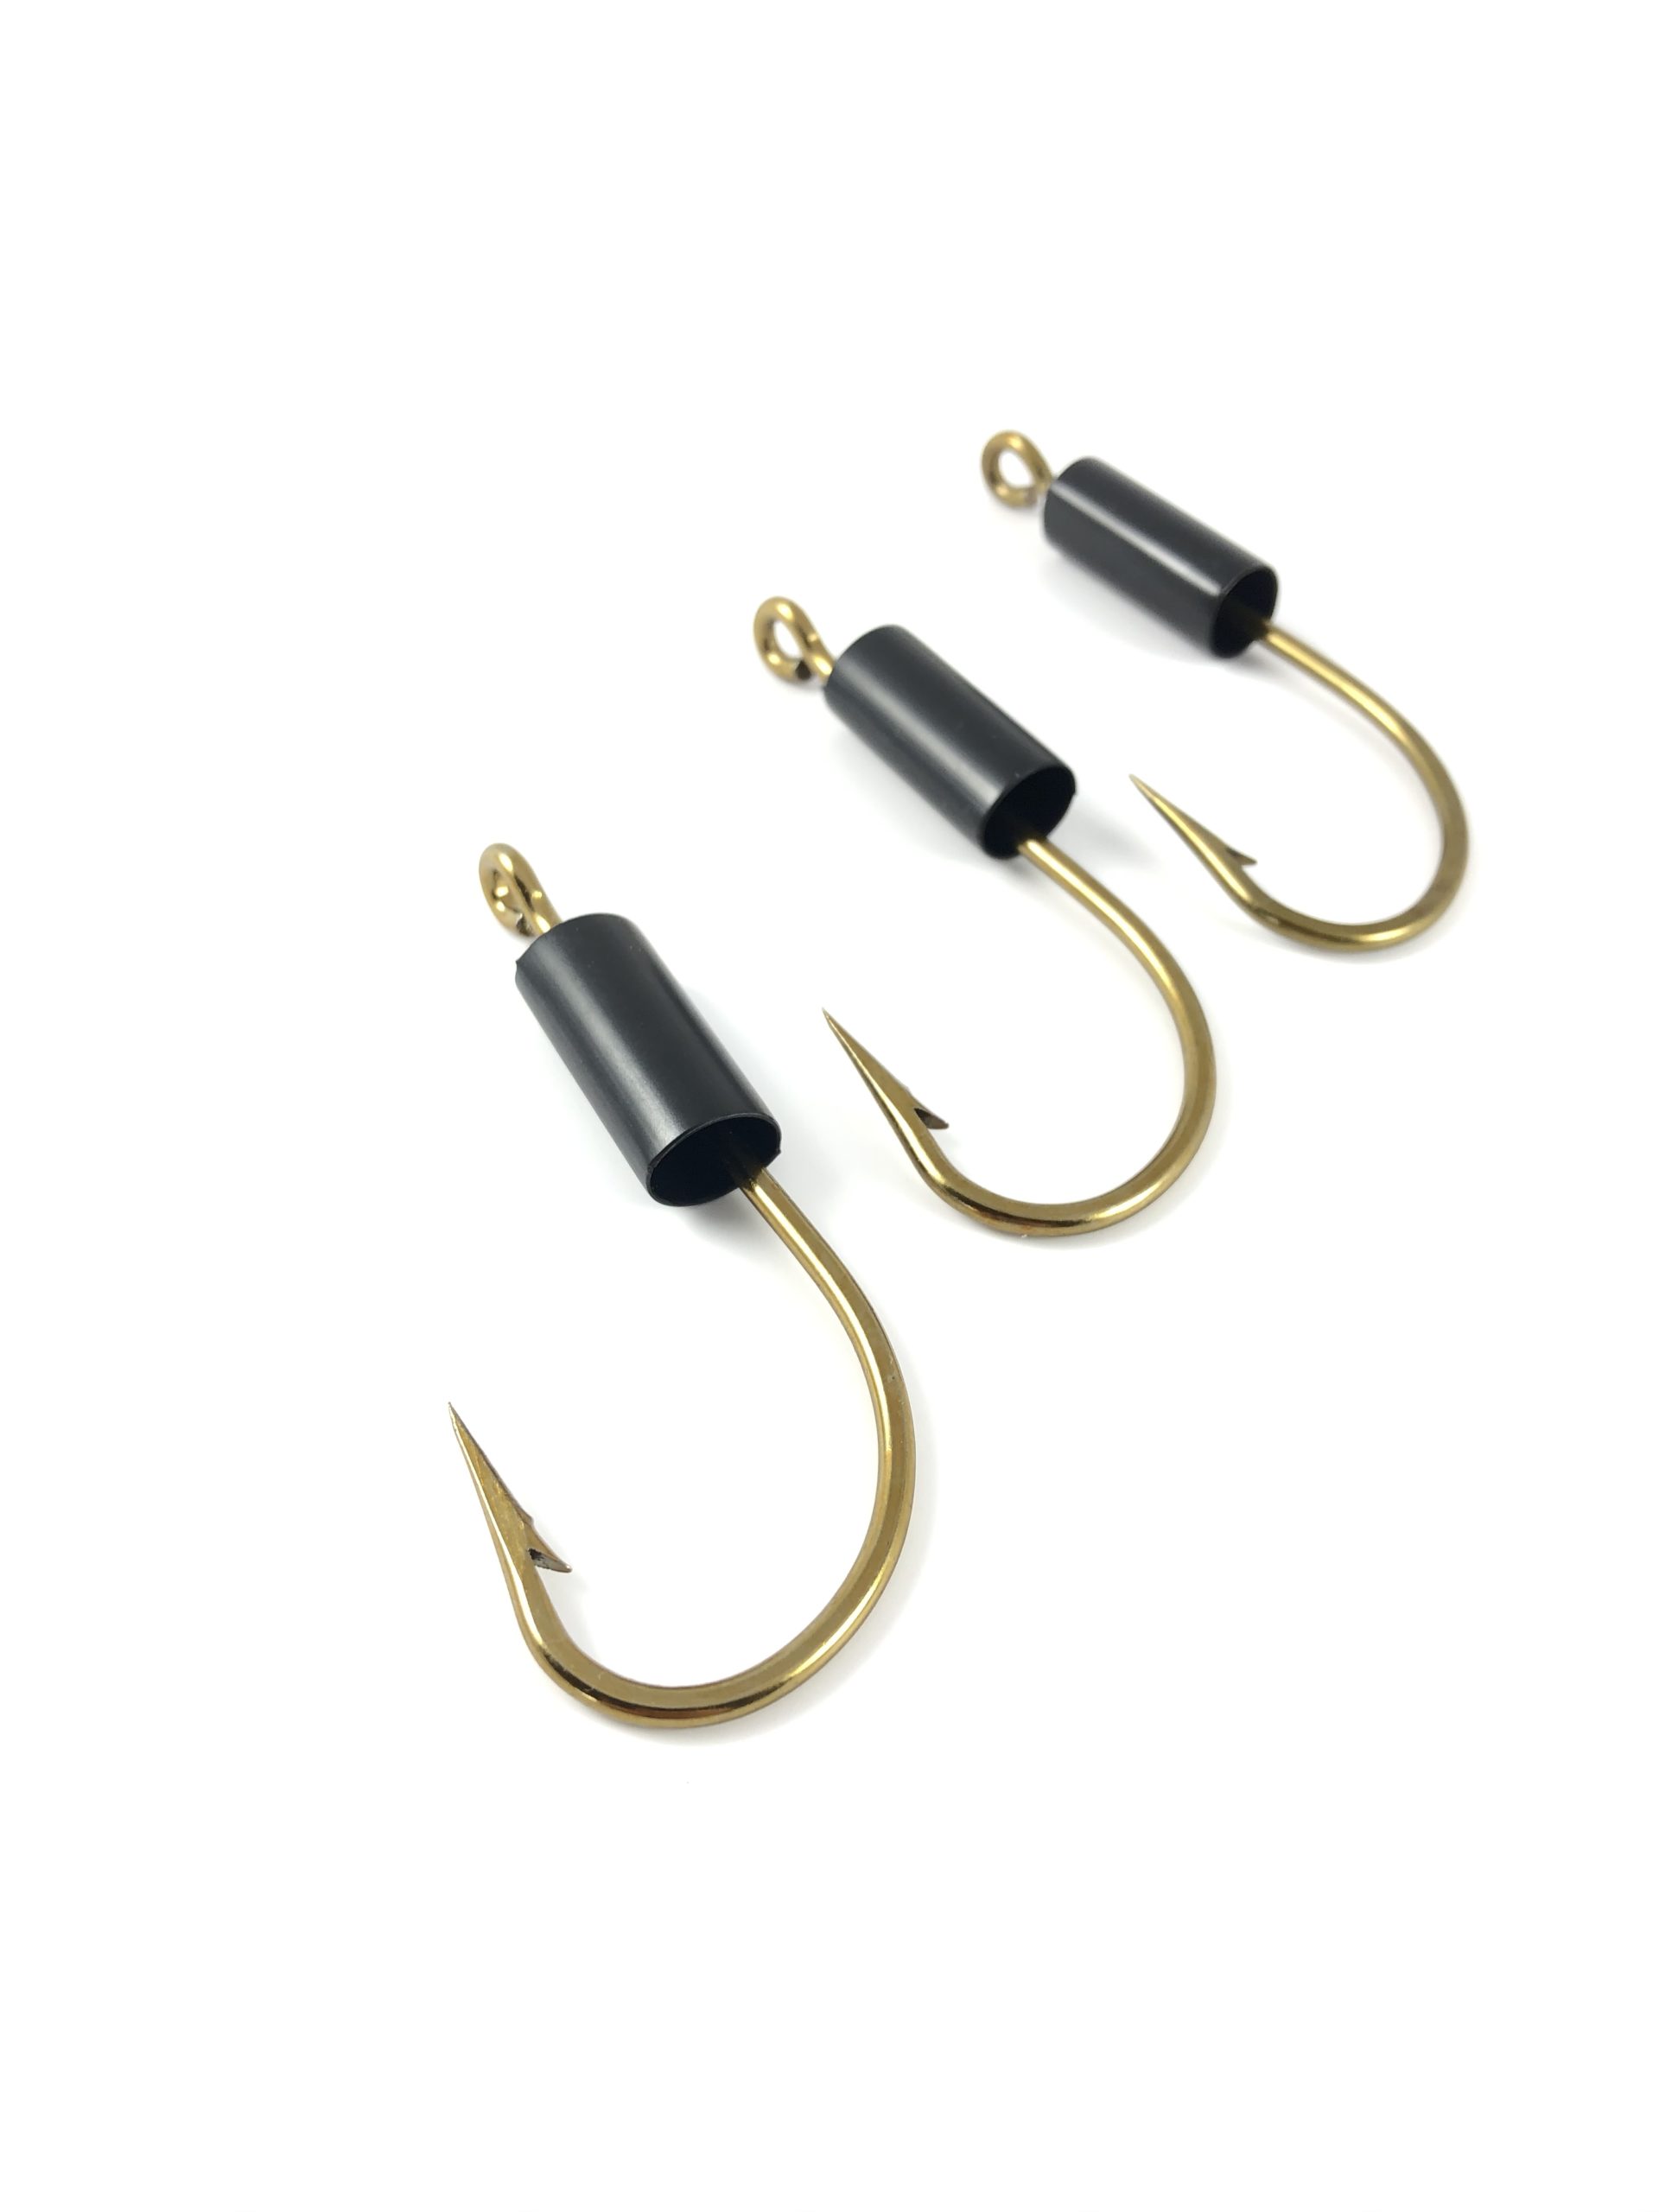 Lawless Lures - Booby Trap - Replacement Hooks